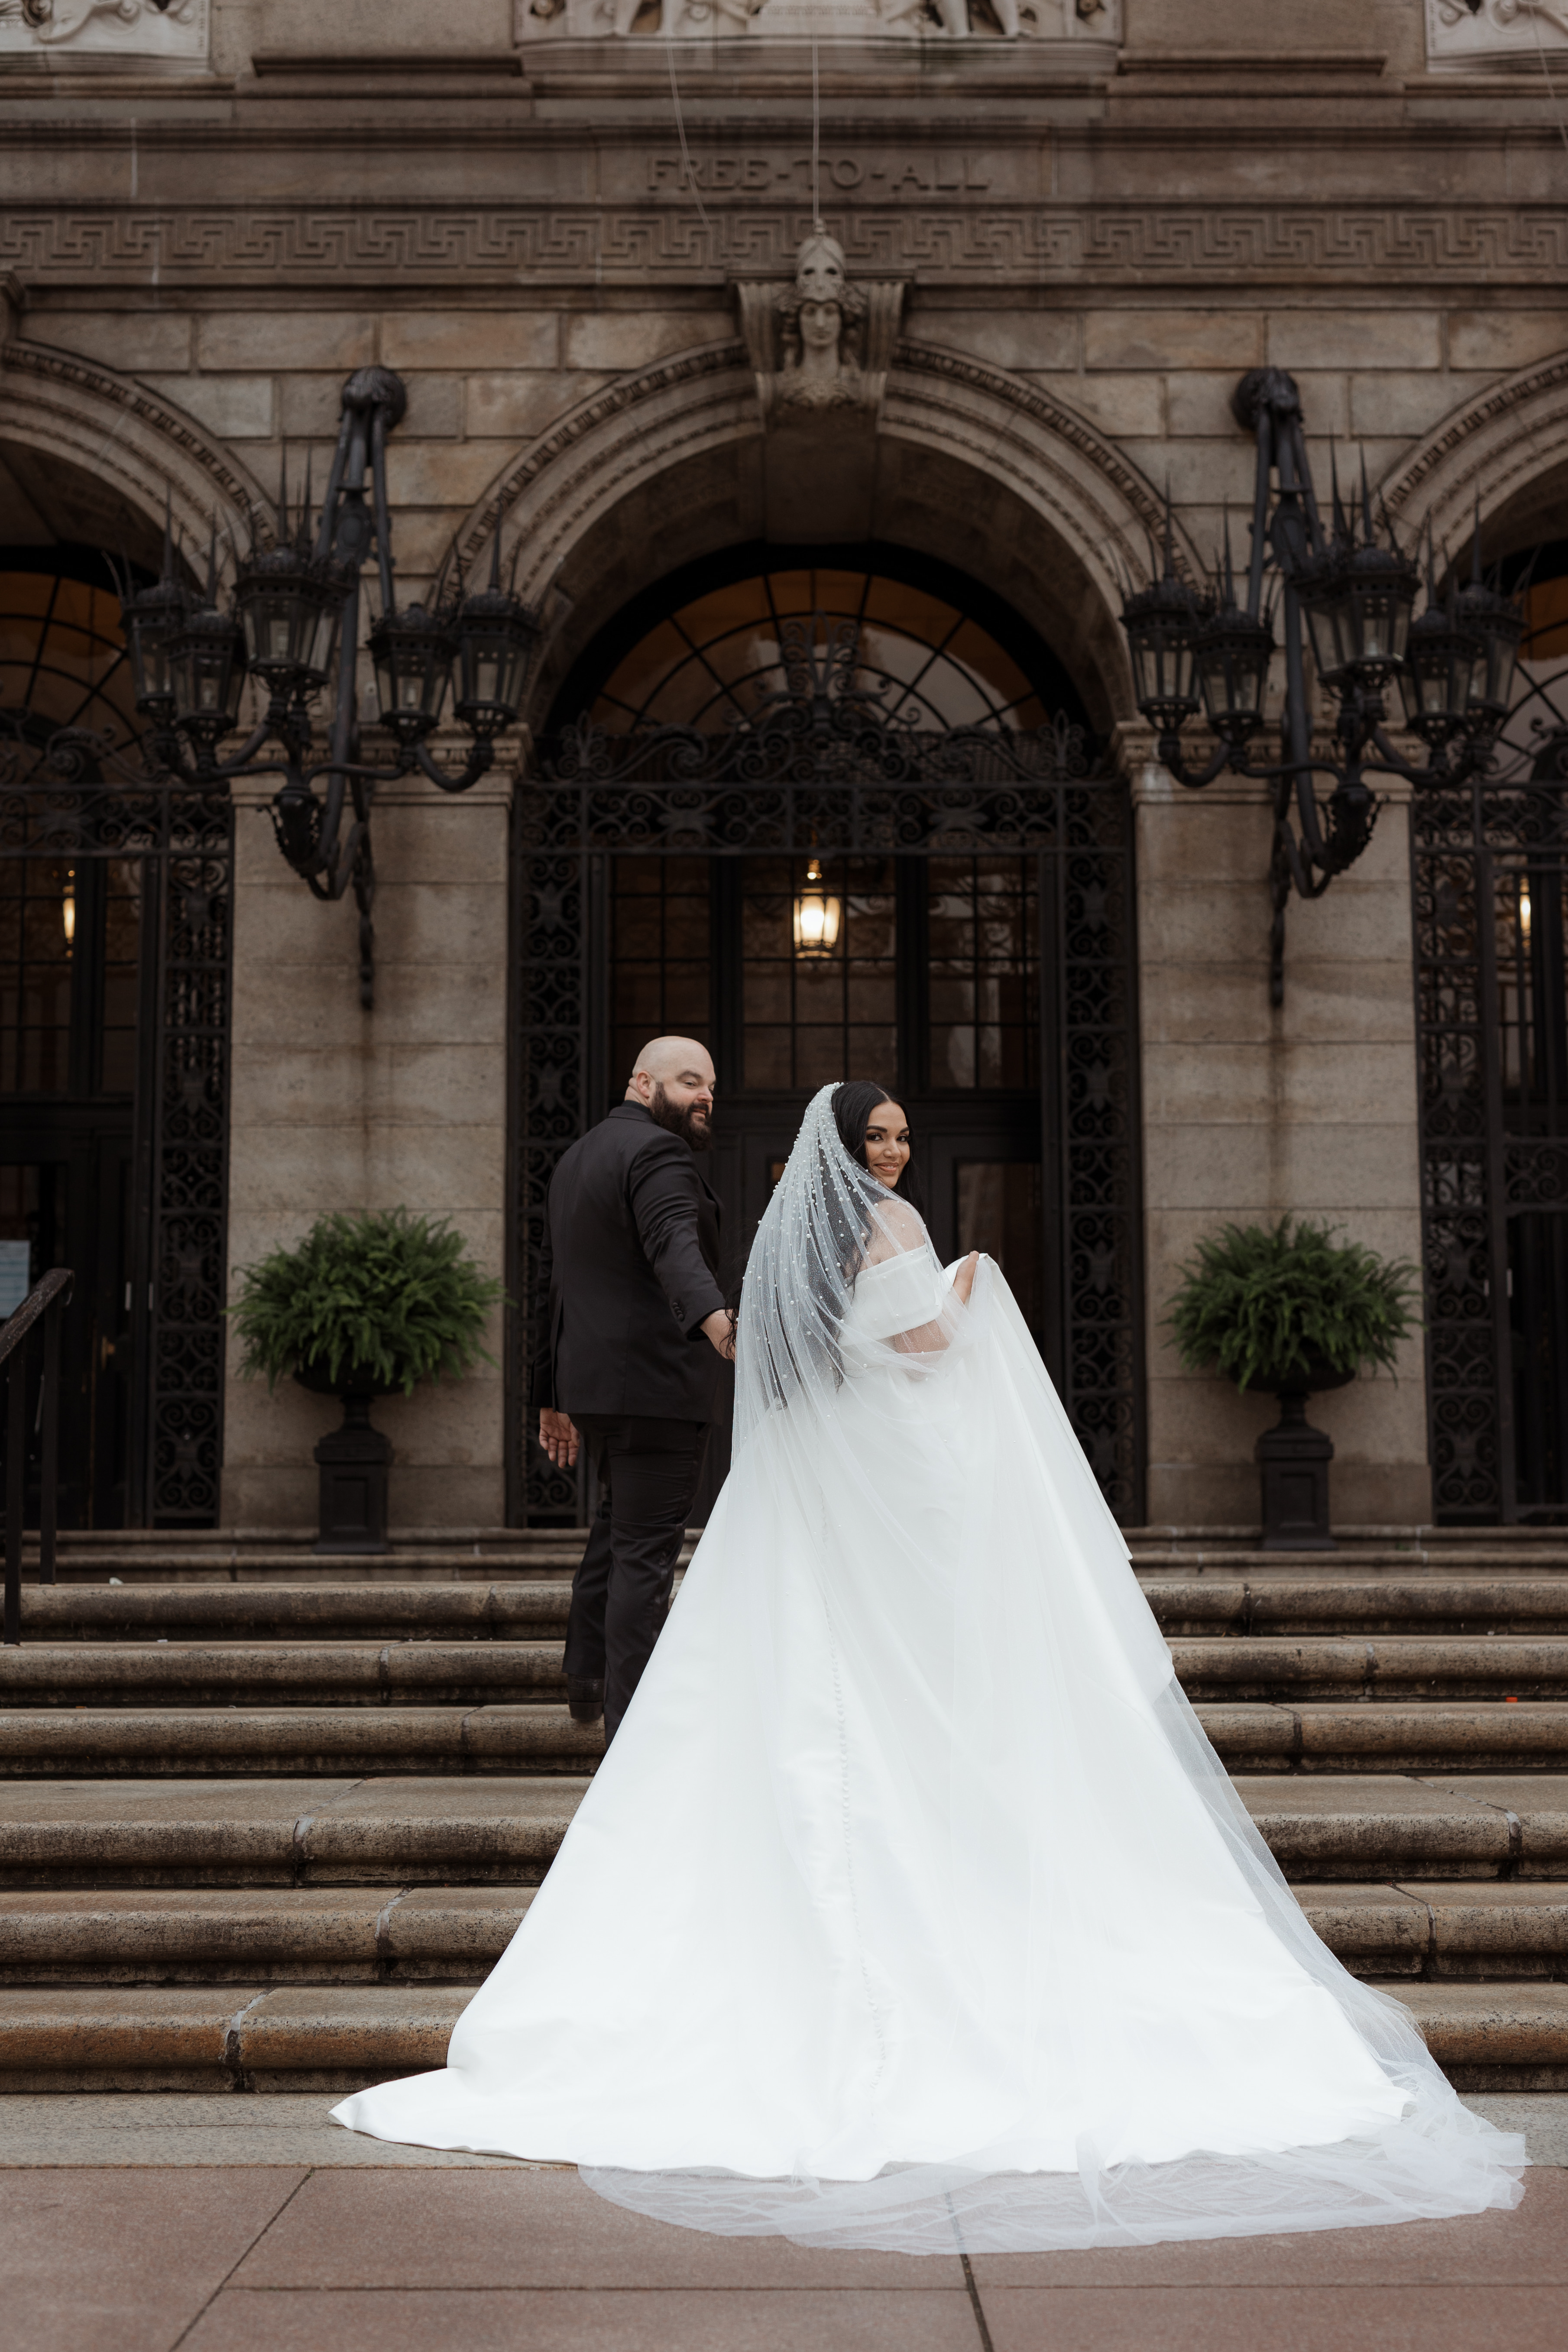 Bride and groom walking up stairs towards entrance of Boston Public Library